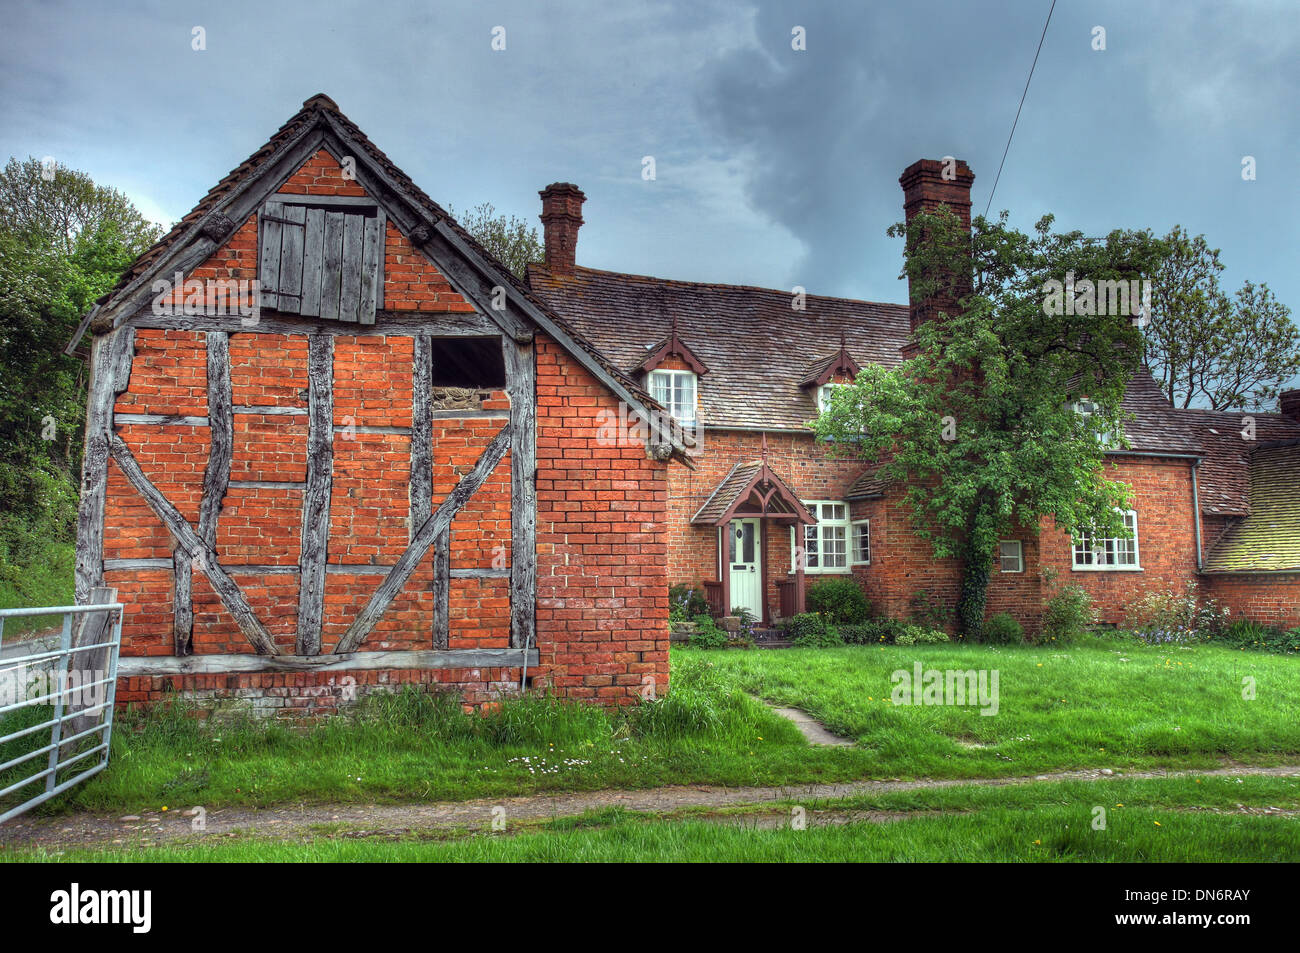 Timber-framed and brick farmhouse, Worcestershire, England. Stock Photo